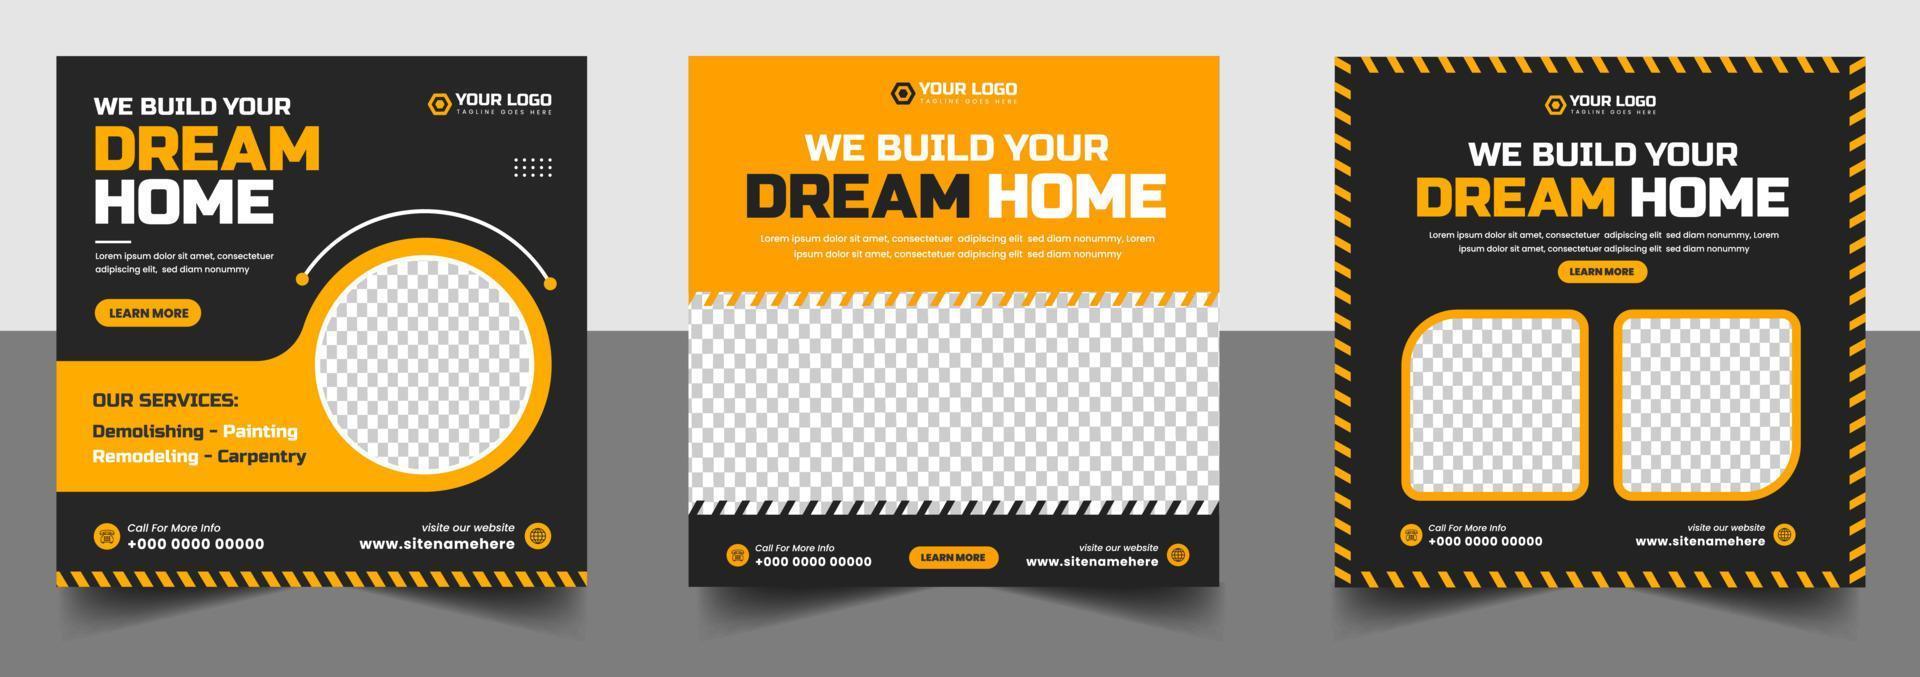 Construction social media post banner design Template with yellow color, Corporate construction tools social media post design, home improvement banner template, home repair social media post banner. vector